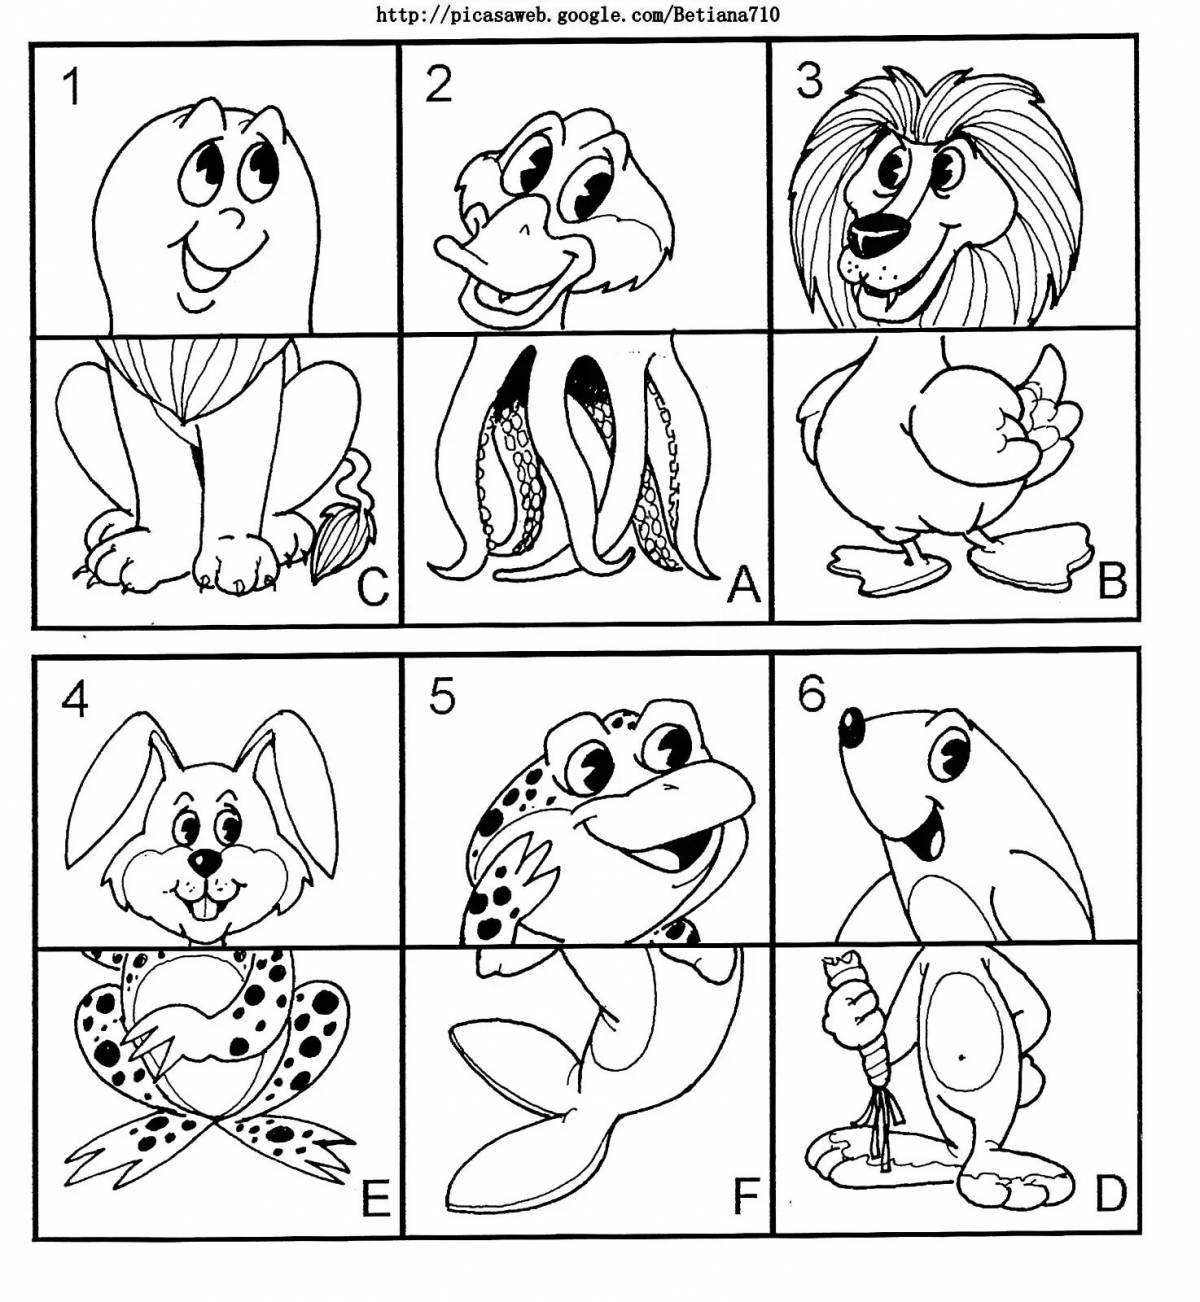 Coloring games with animals